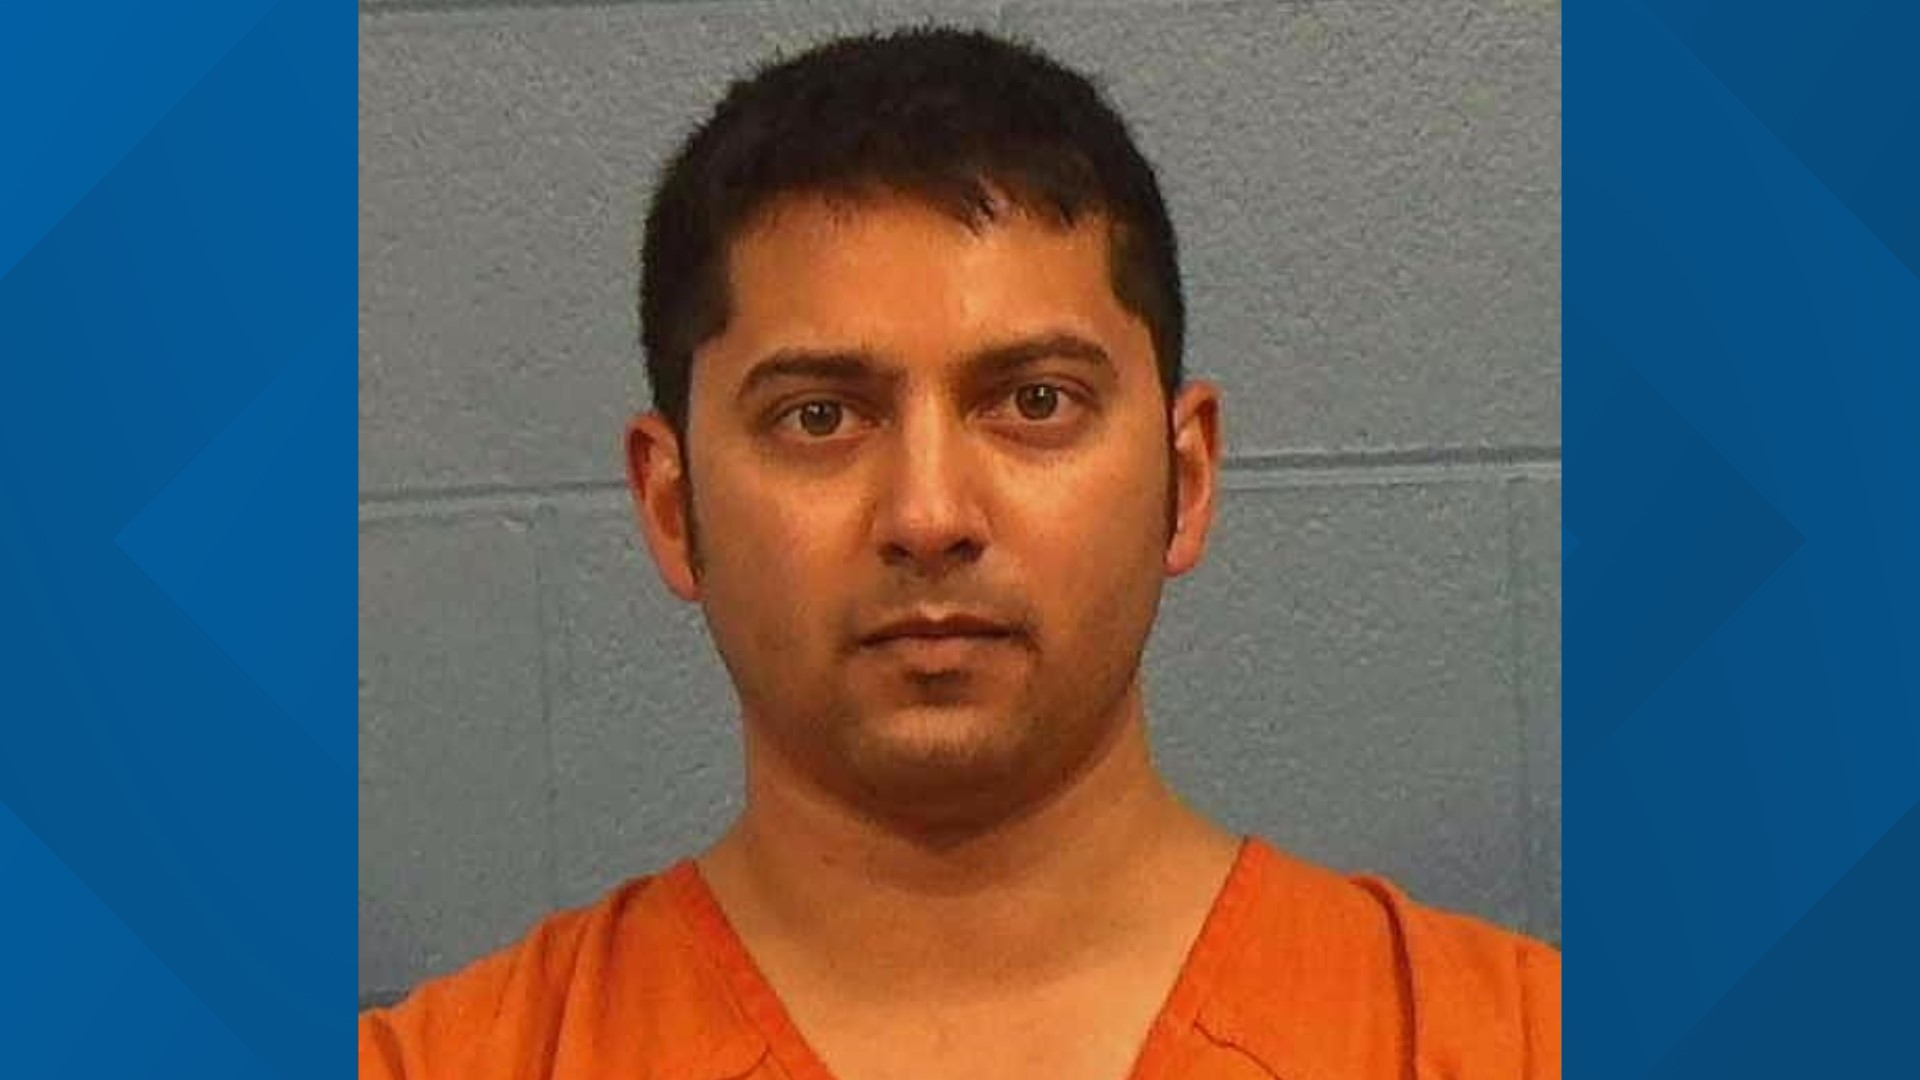 A grand jury indicted Neil Mehta who fled from federal agents earlier this year.